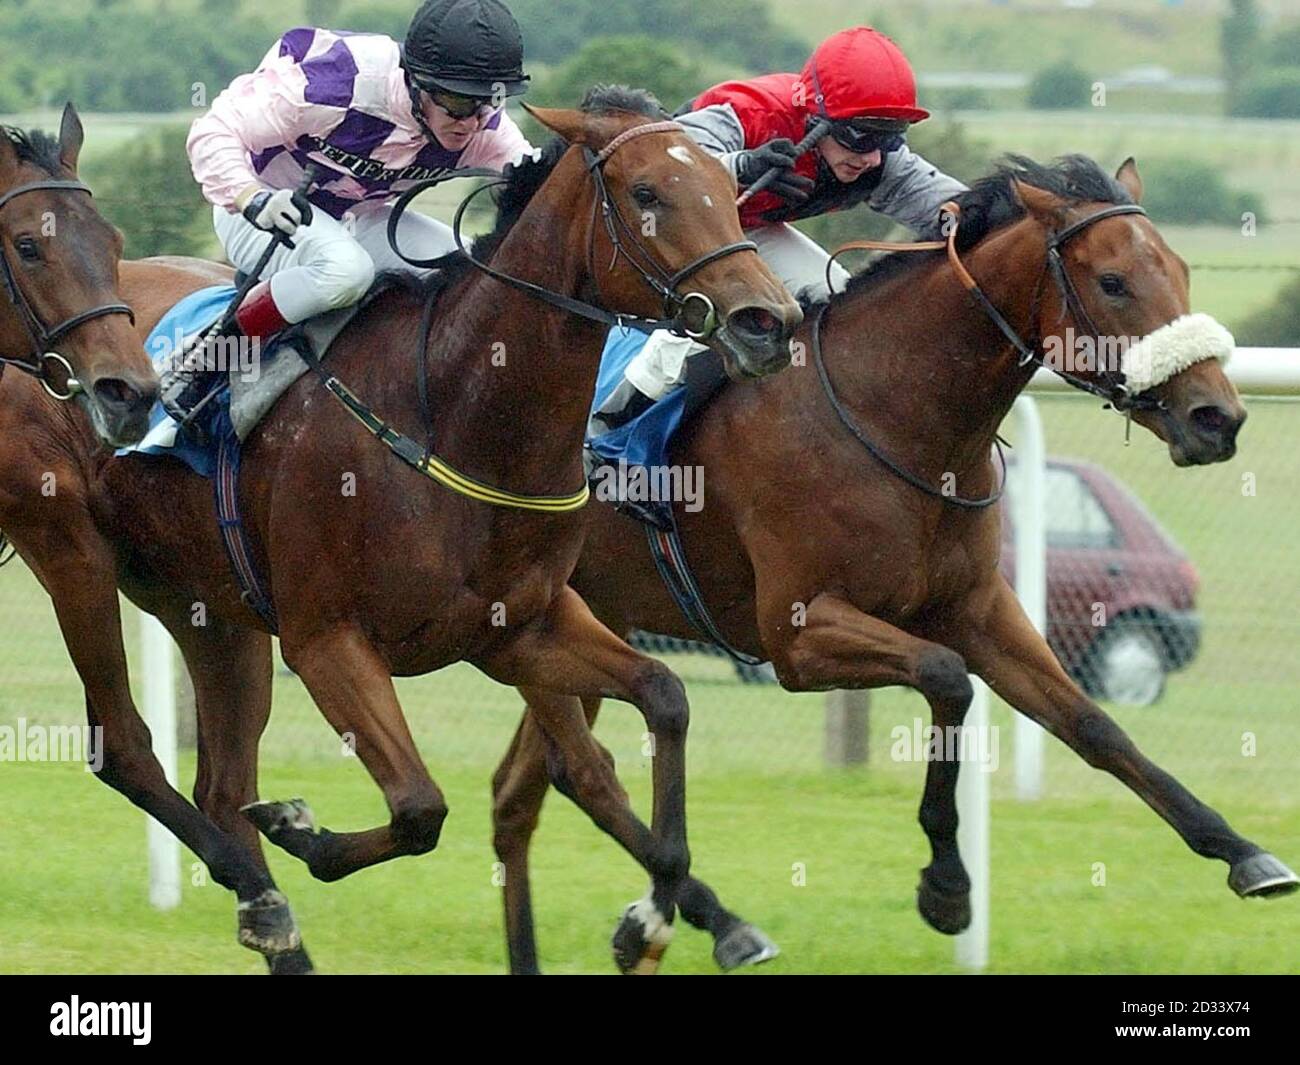 Miss Takeortwo with jockey Paul Hanagan (right) wins ahead of Victory Flip with jockey Graham Gibbons in the Irwins Maiden Auction Stakes at Pontefract Races. Stock Photo